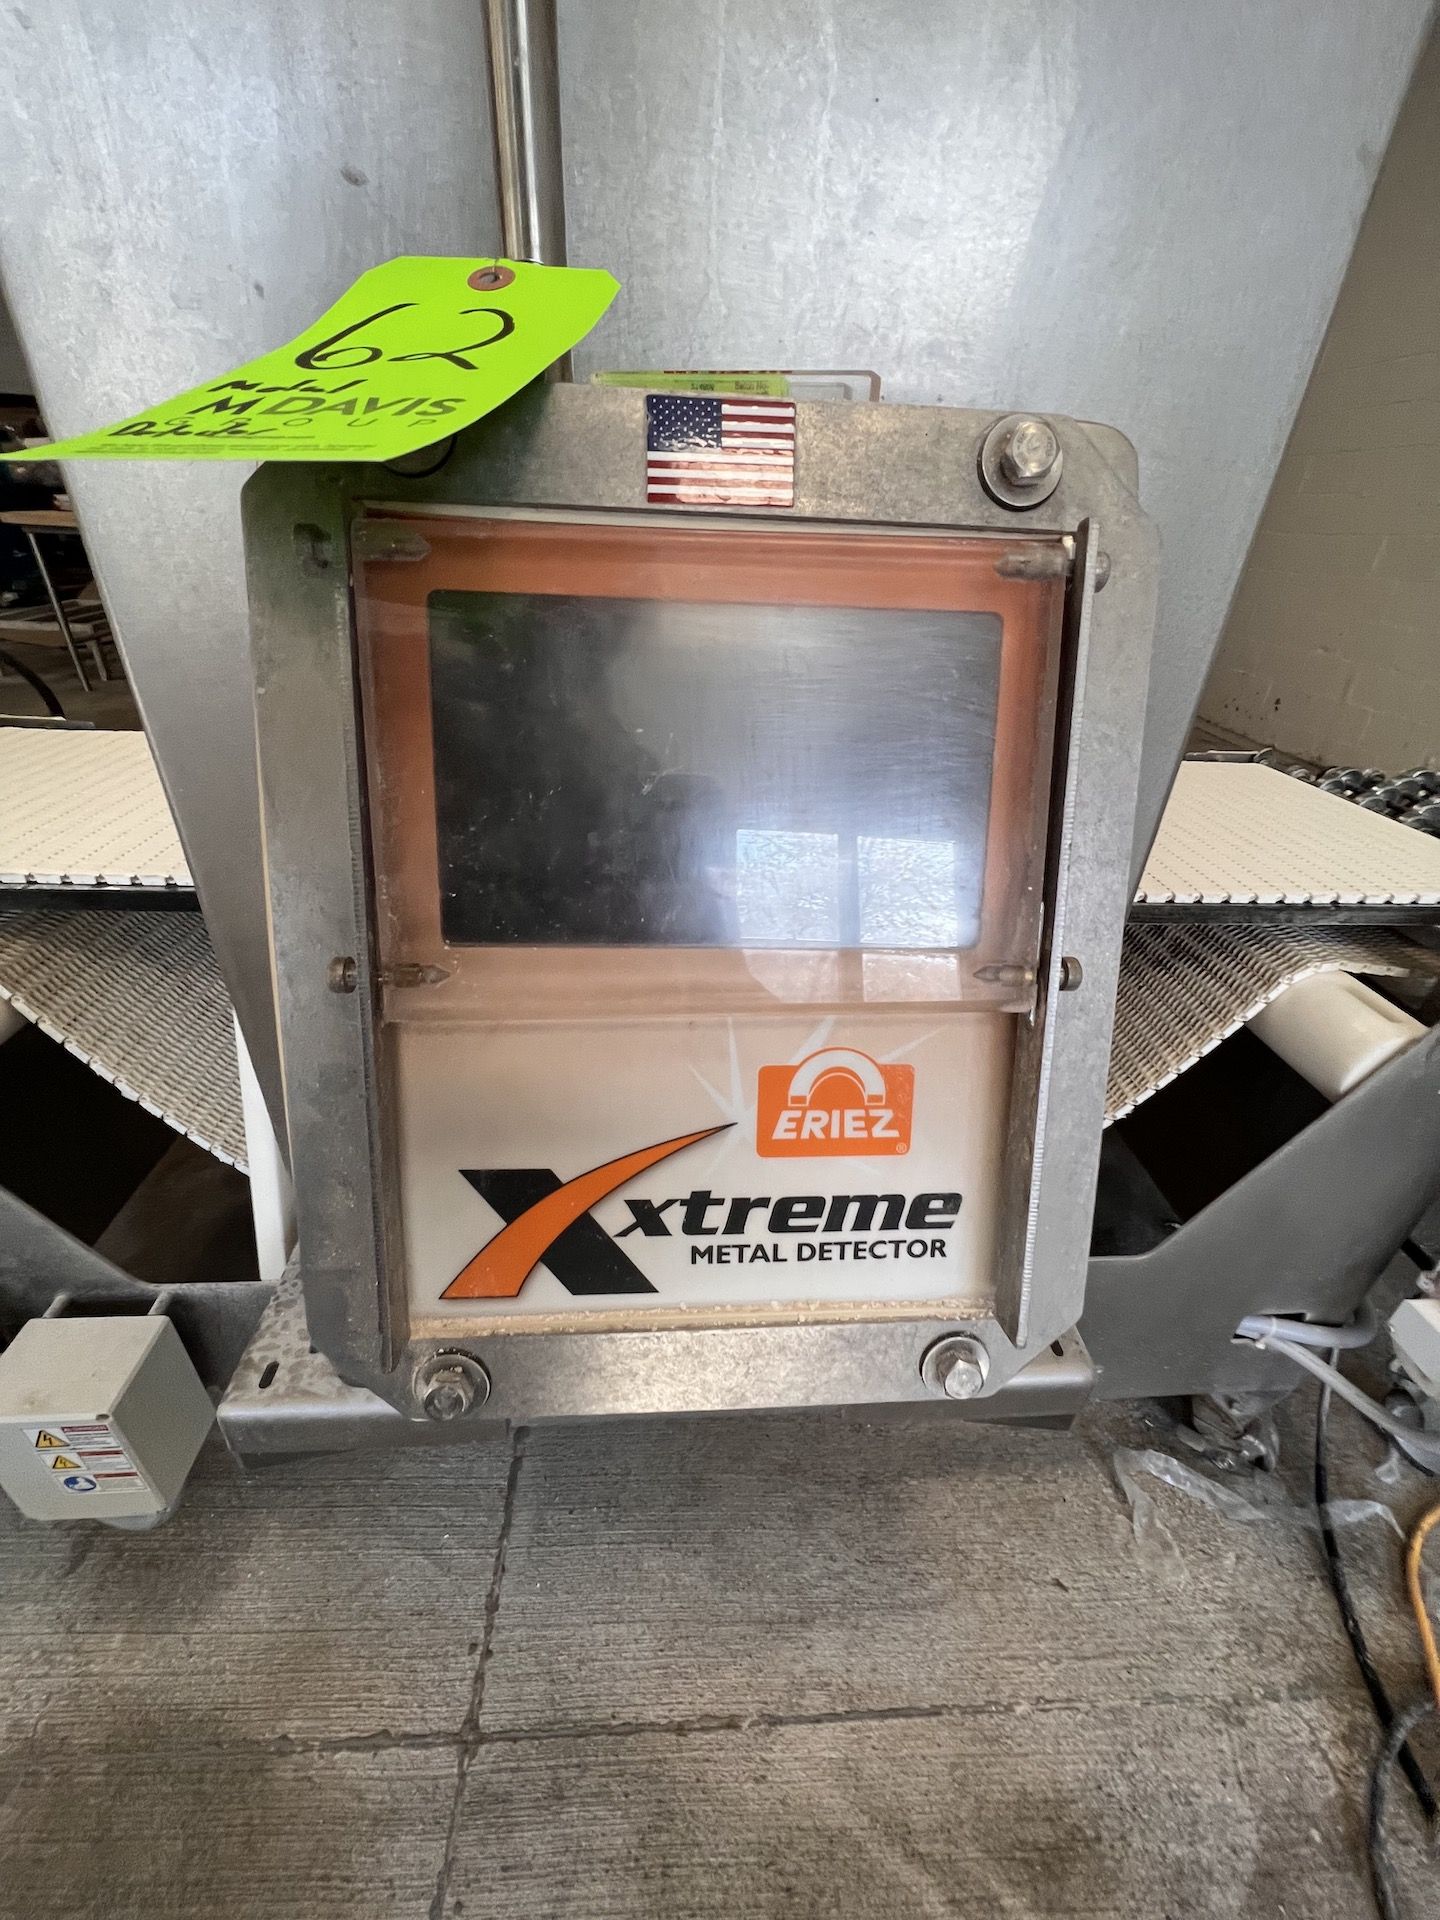 ERIEZ XTREME S/S METAL DETECTOR, WITH APROX. 17-1/2” W x 14” H PRODUCT OPENING, WITH 17” W PLASTIC - Image 2 of 8